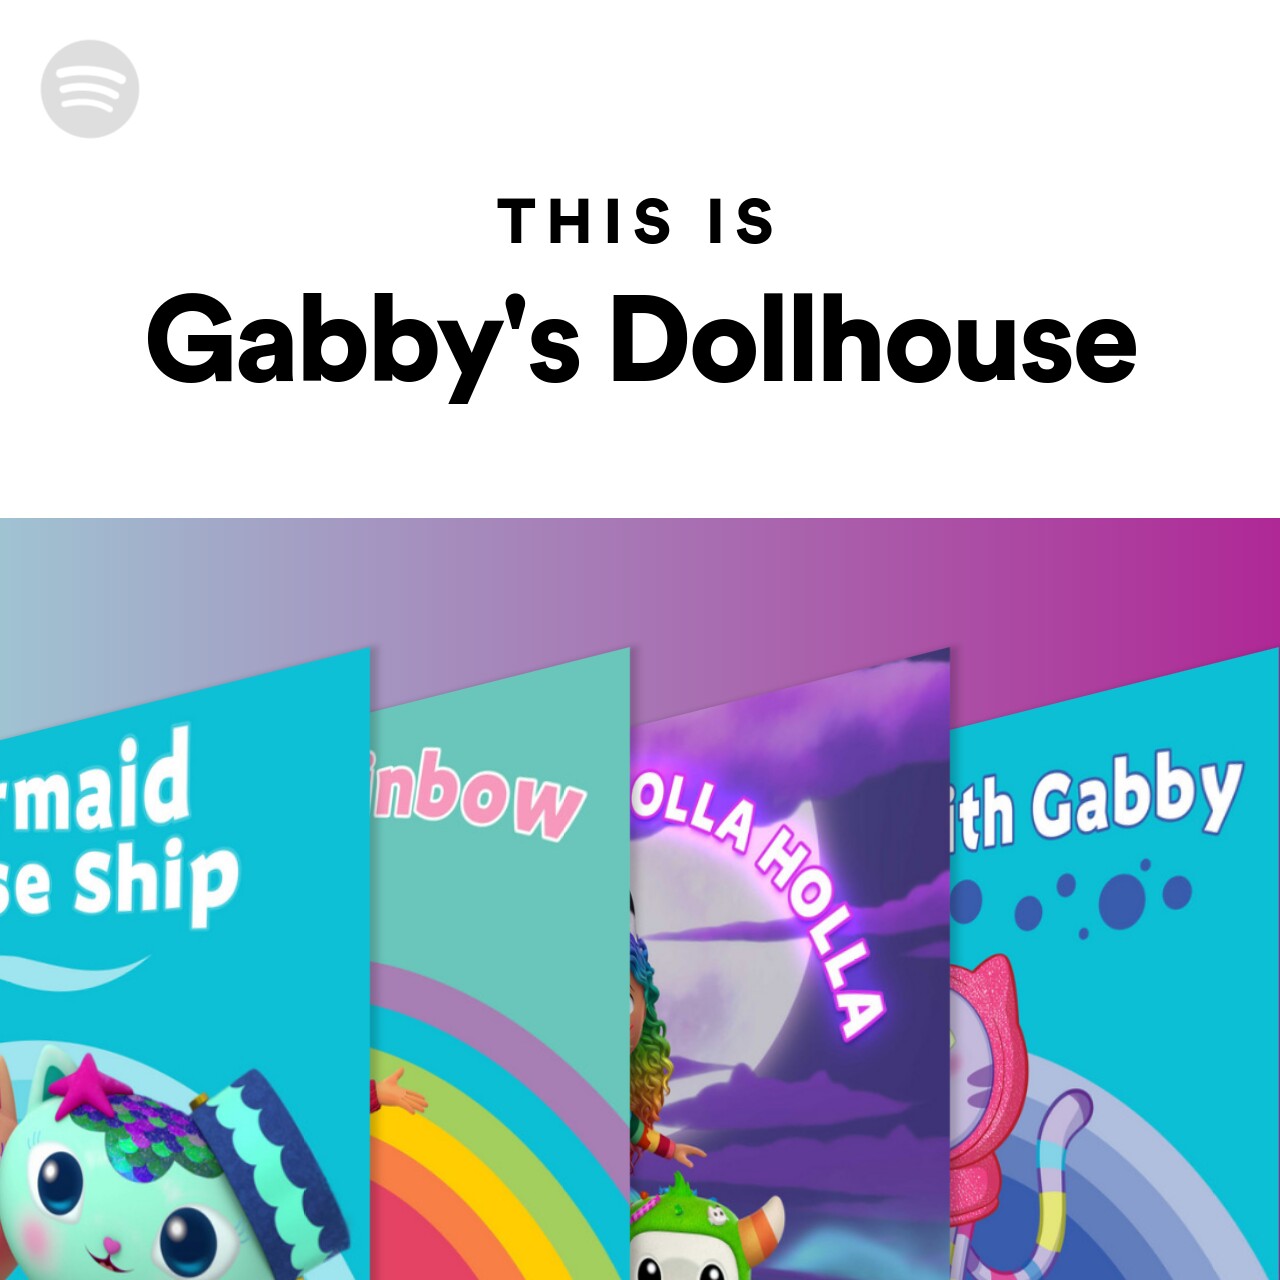 This Is Gabby's Dollhouse